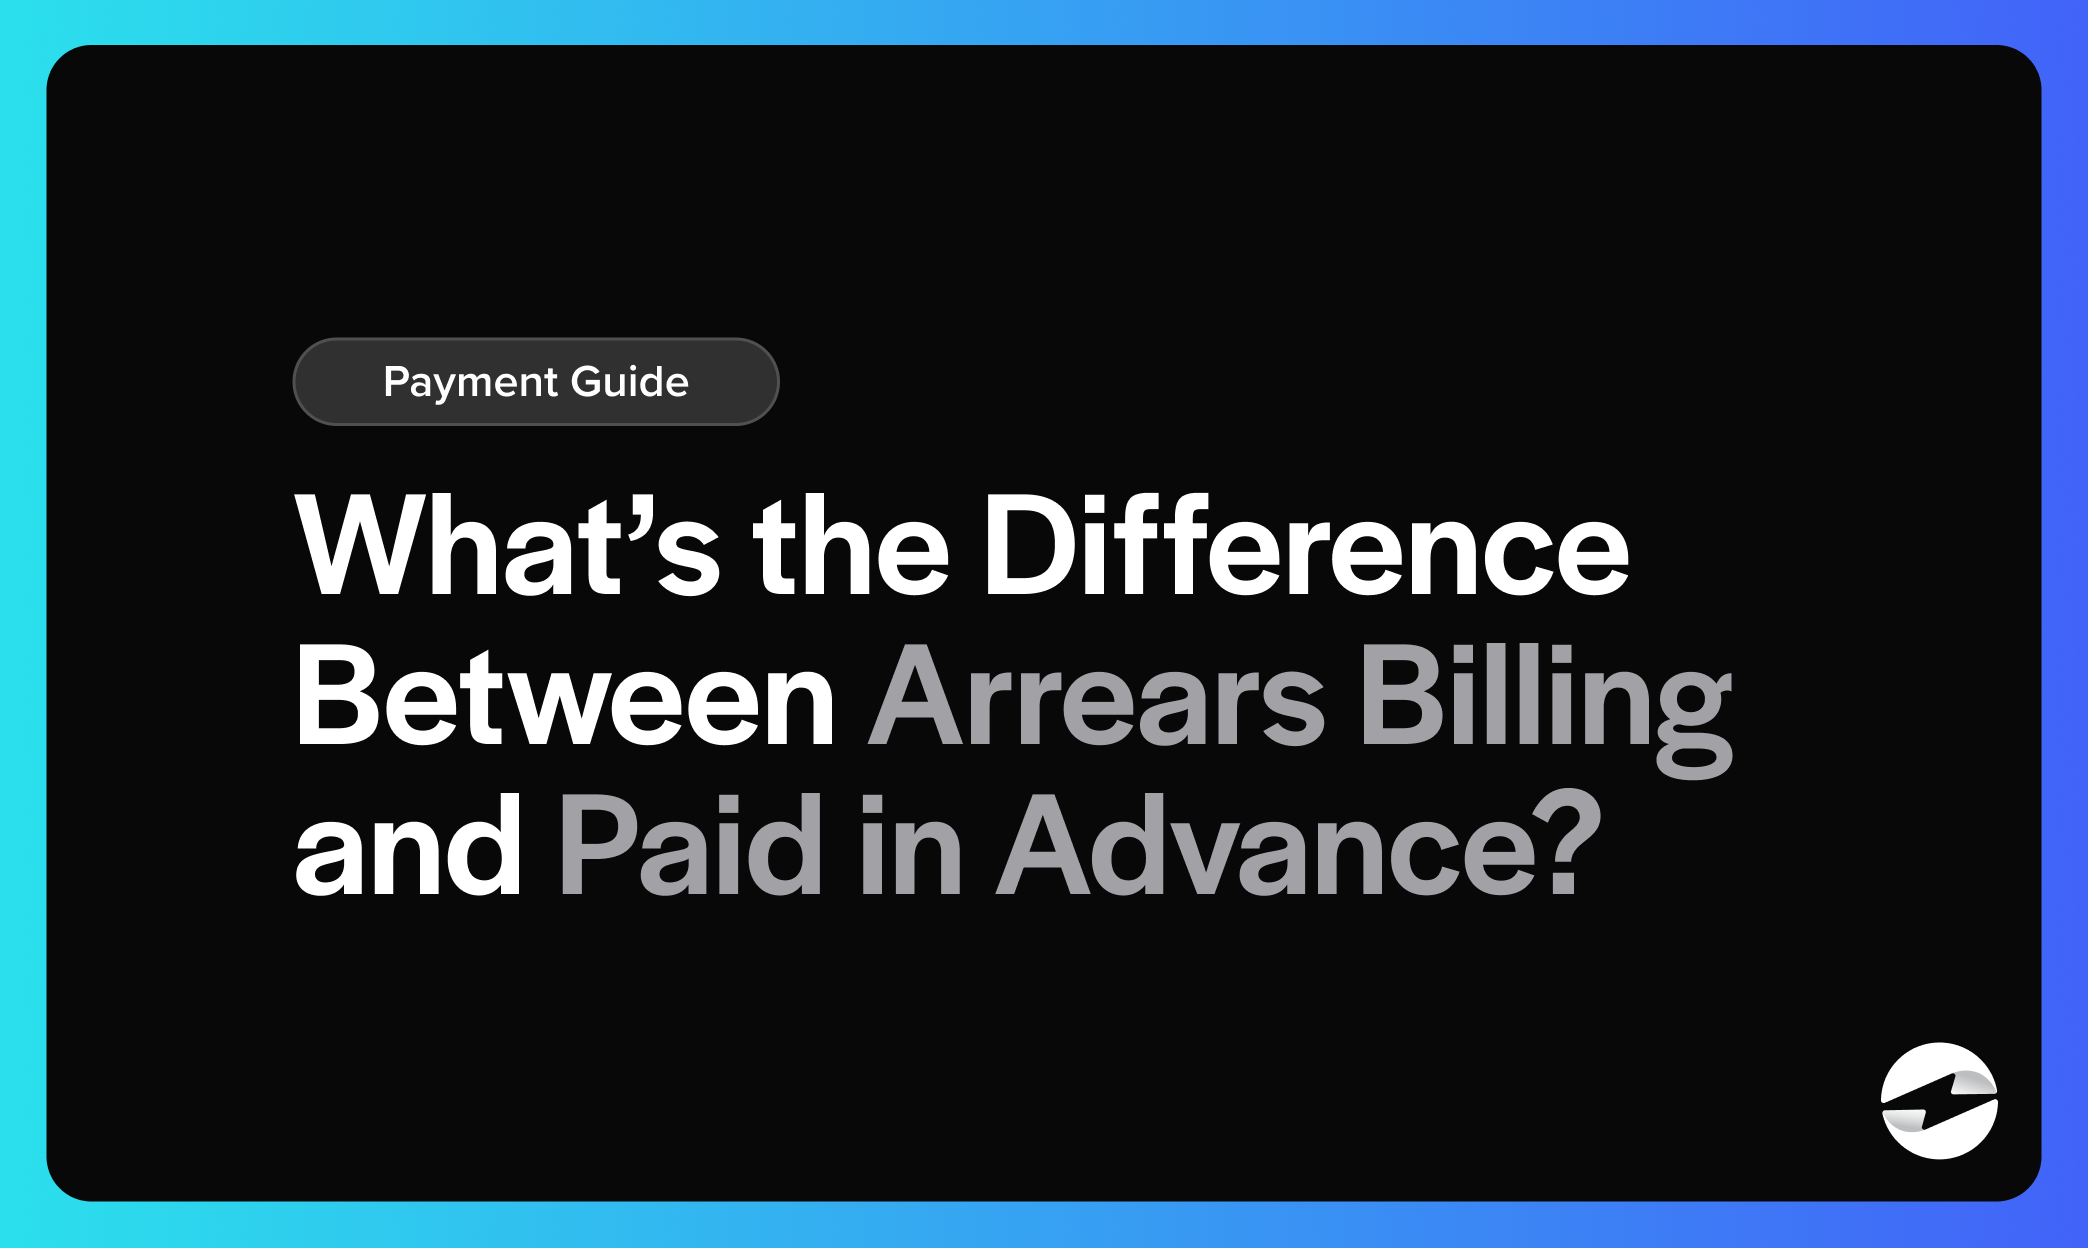 What’s the Difference Between Arrears Billing and Paid in Advance?